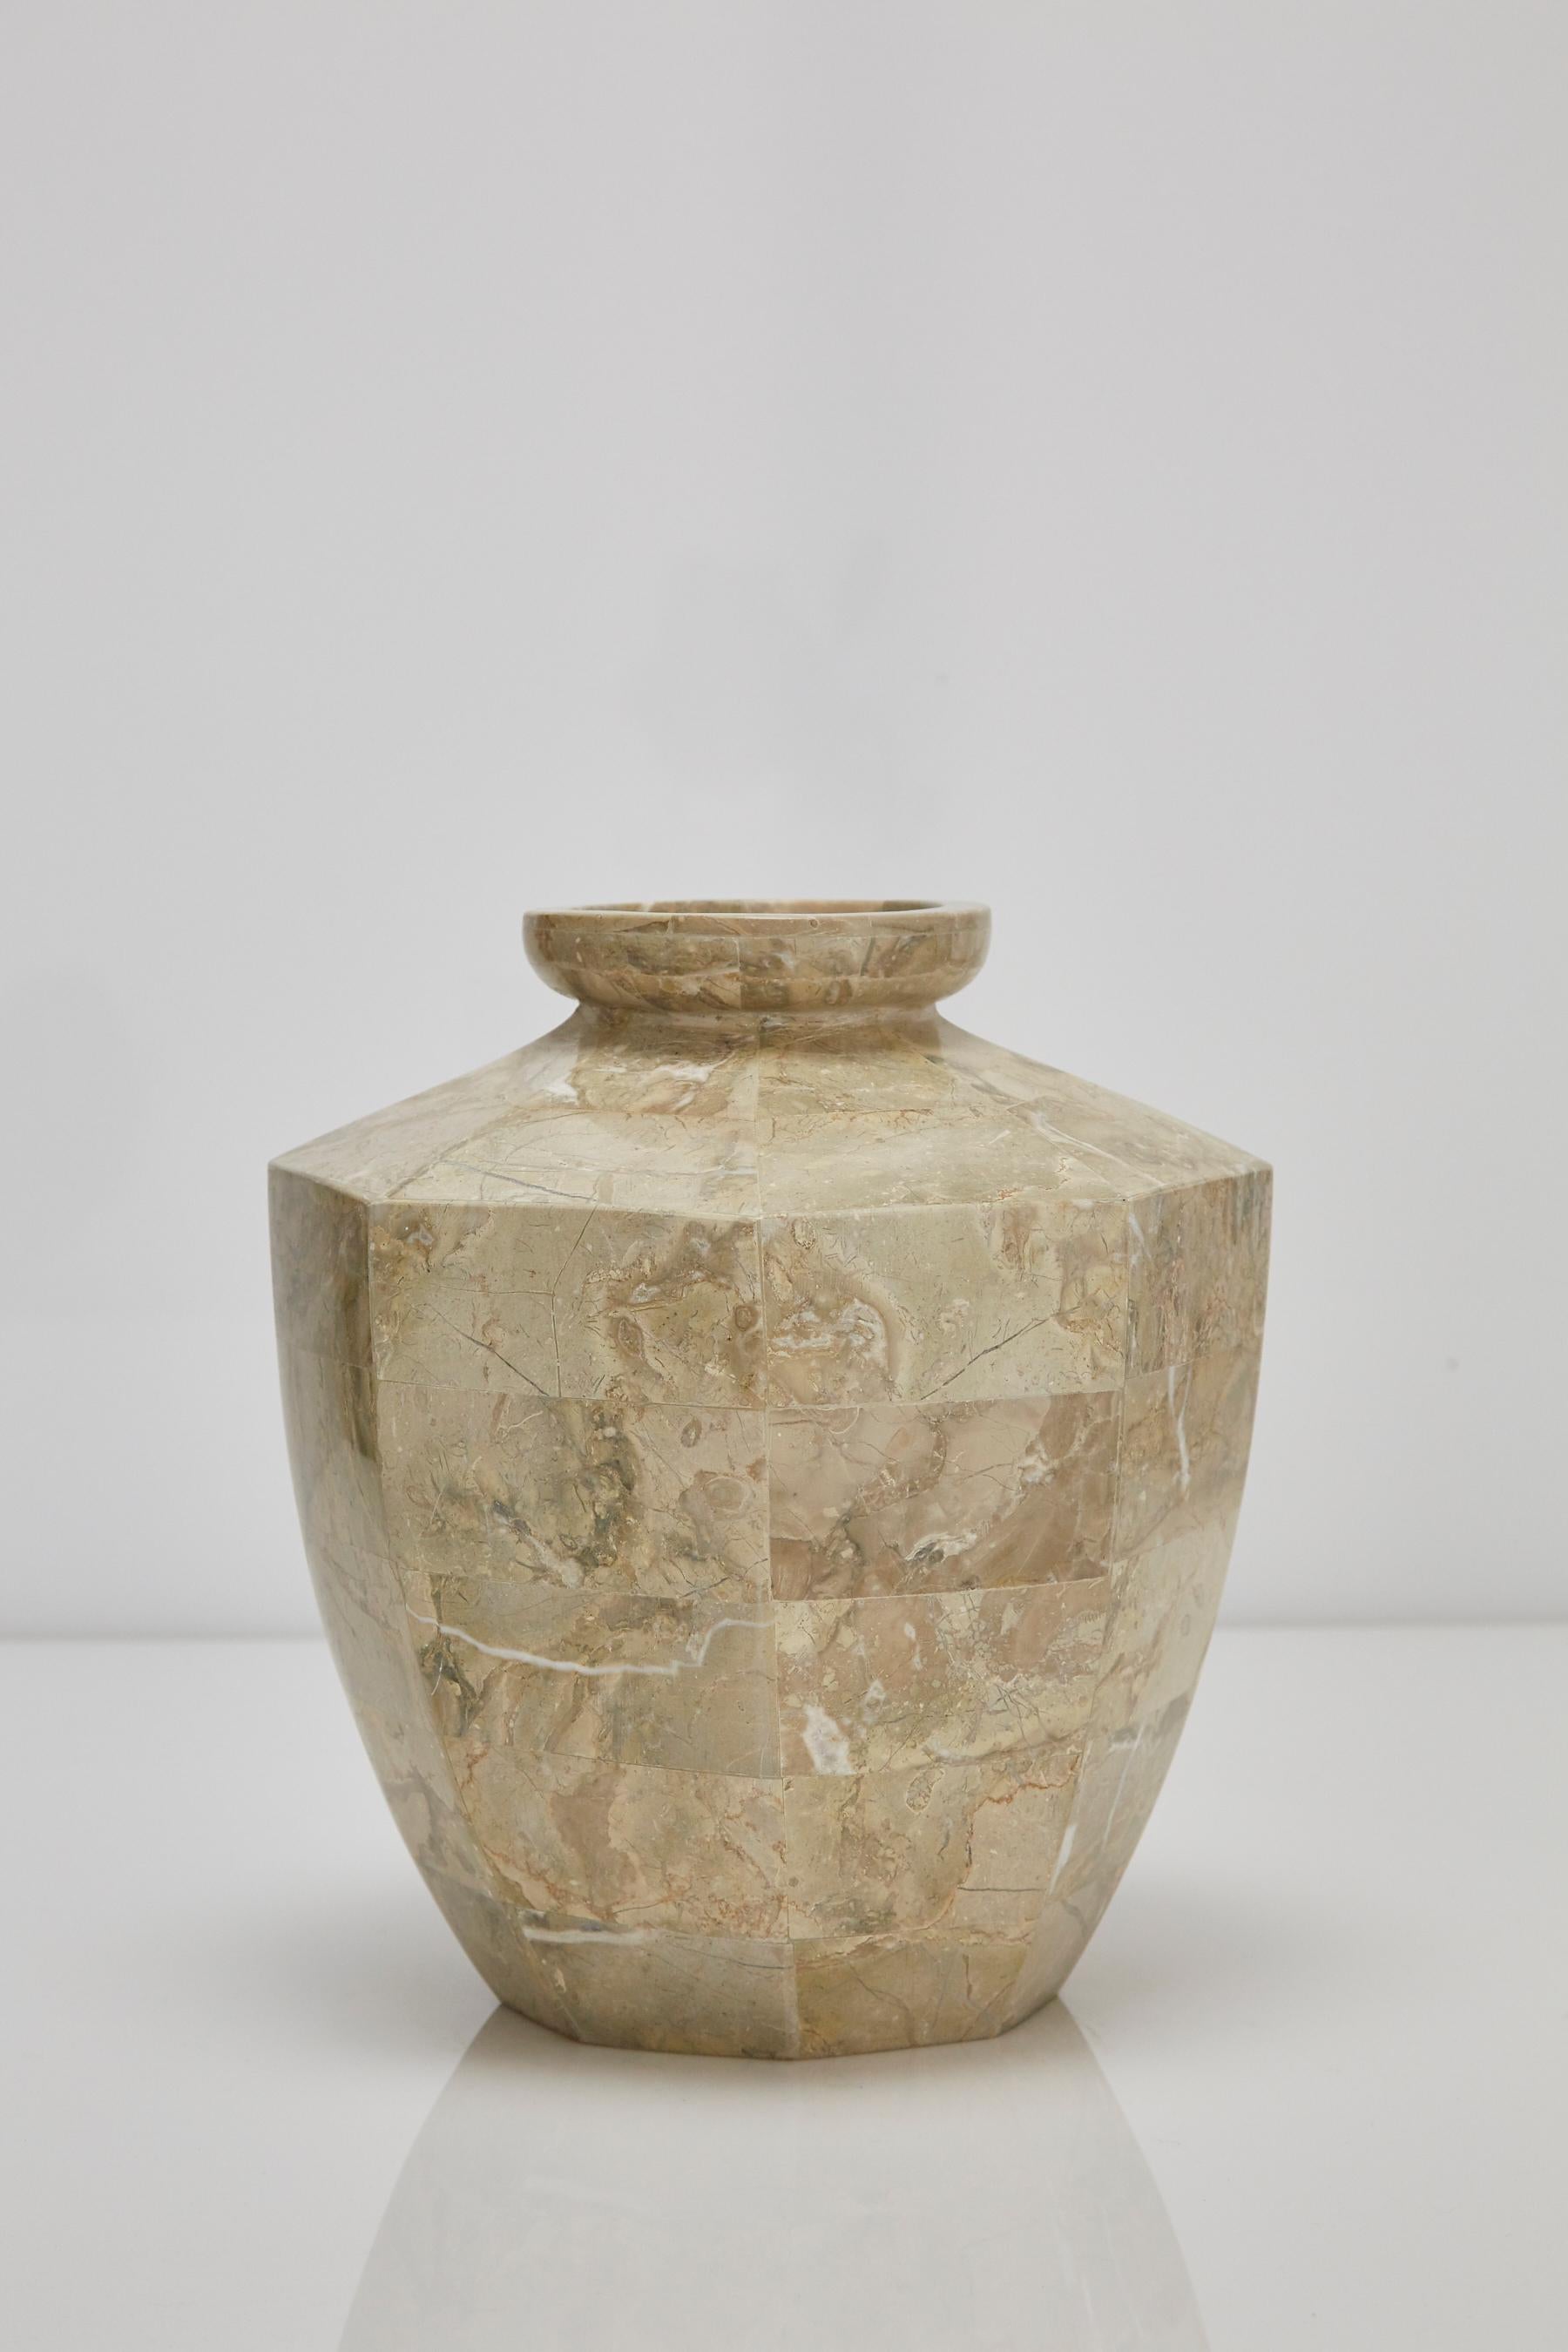 Short octagonal flower vase executed in tessellated cantor stone over a fiberglass body.

All furnishings are made from 100% natural Fossil Stone or Seashell inlay, carefully hand cut and crafted piece-by-piece and precisely inlaid to the form of